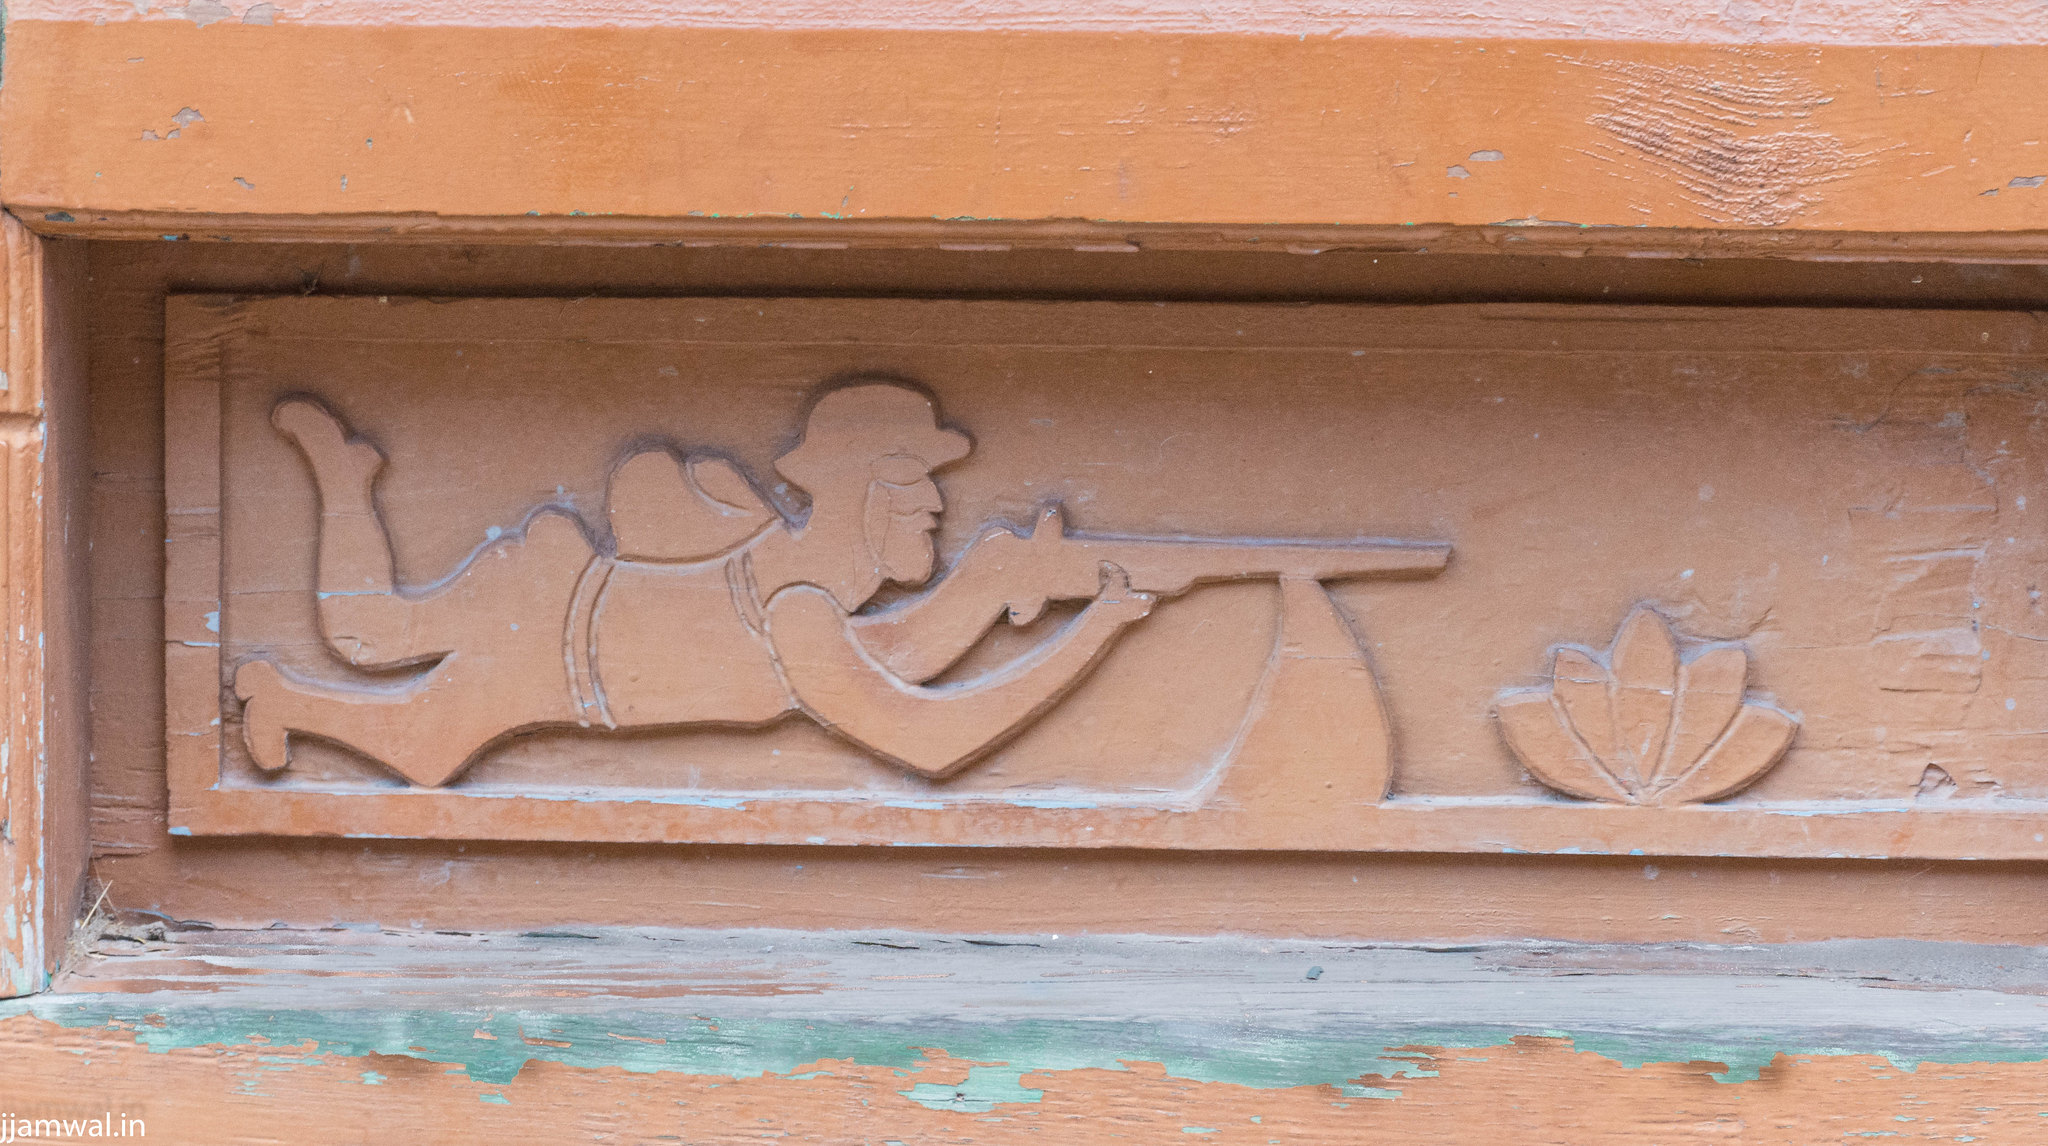 Carving a soldier with his gun in the temple